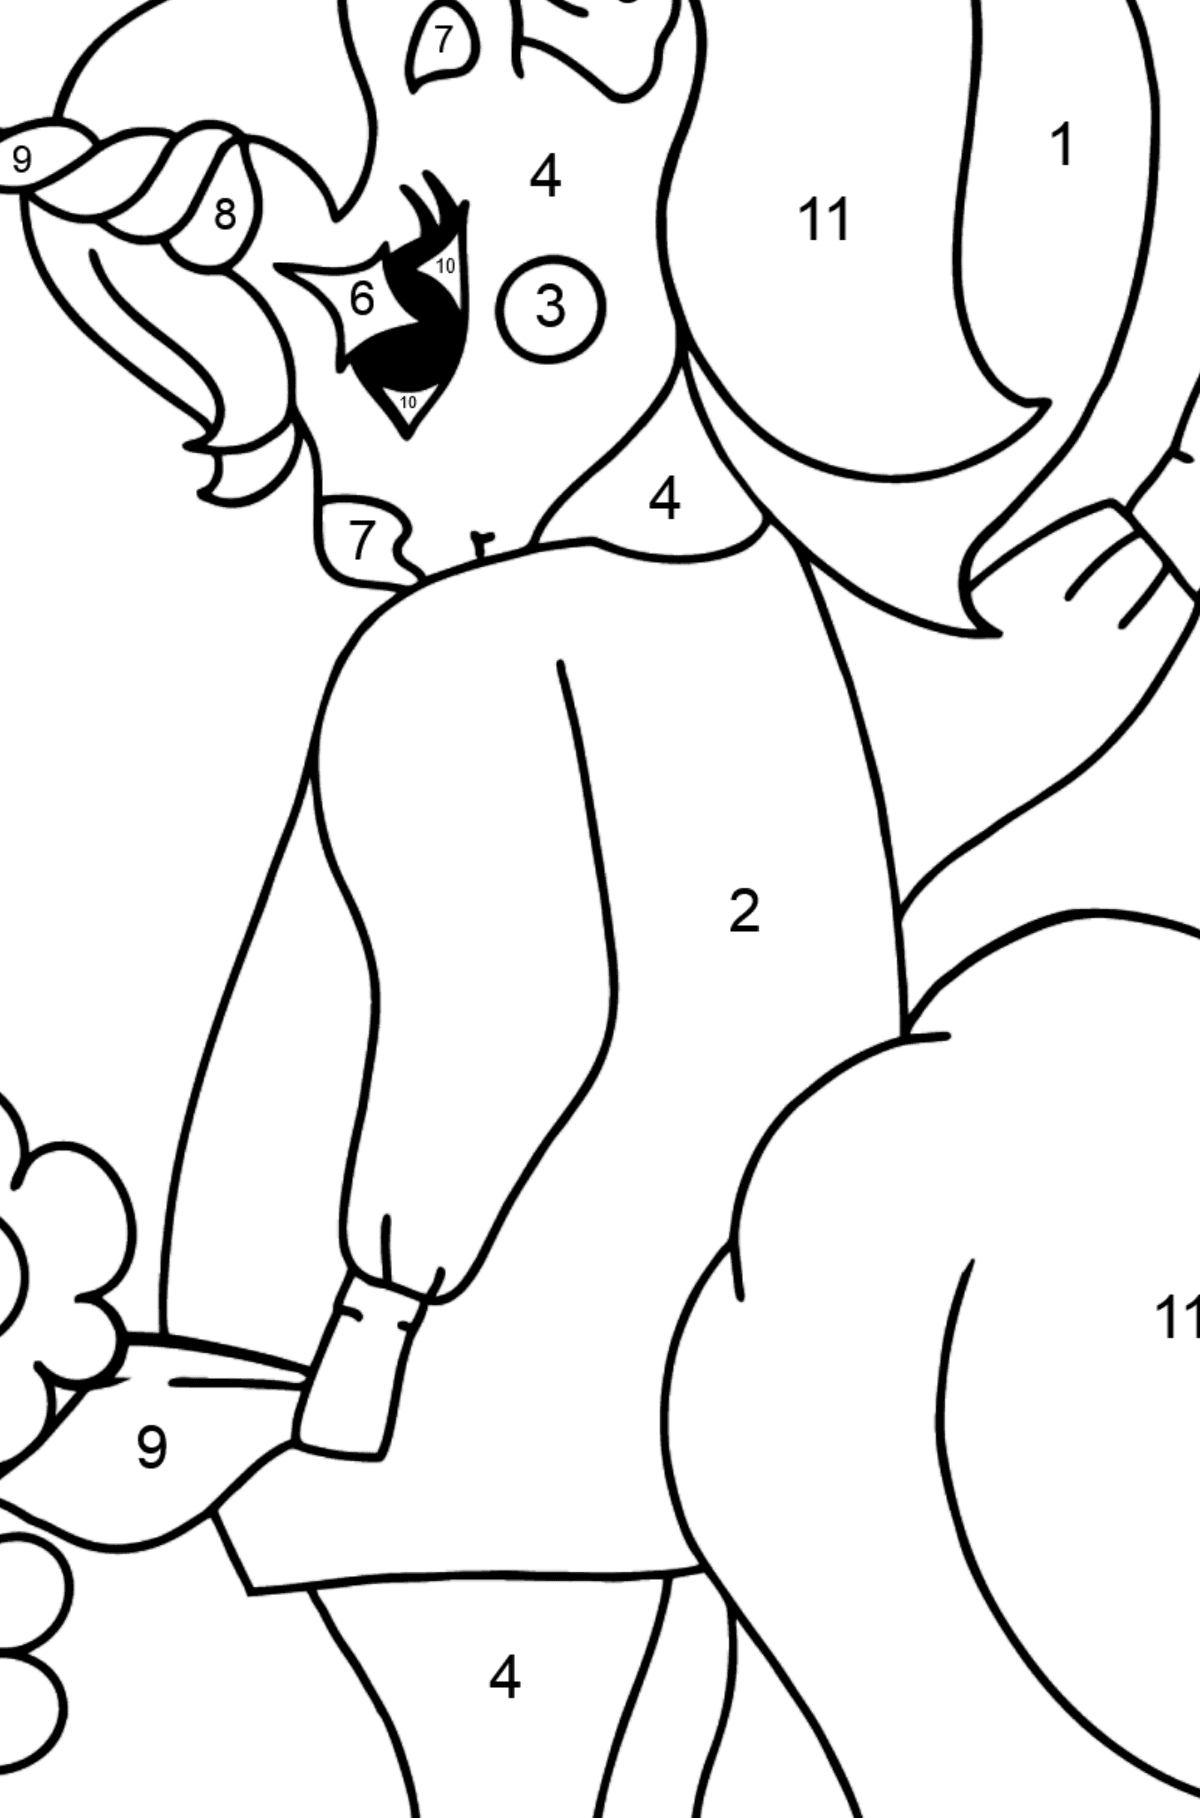 Magic Unicorn coloring page - Coloring by Numbers for Kids